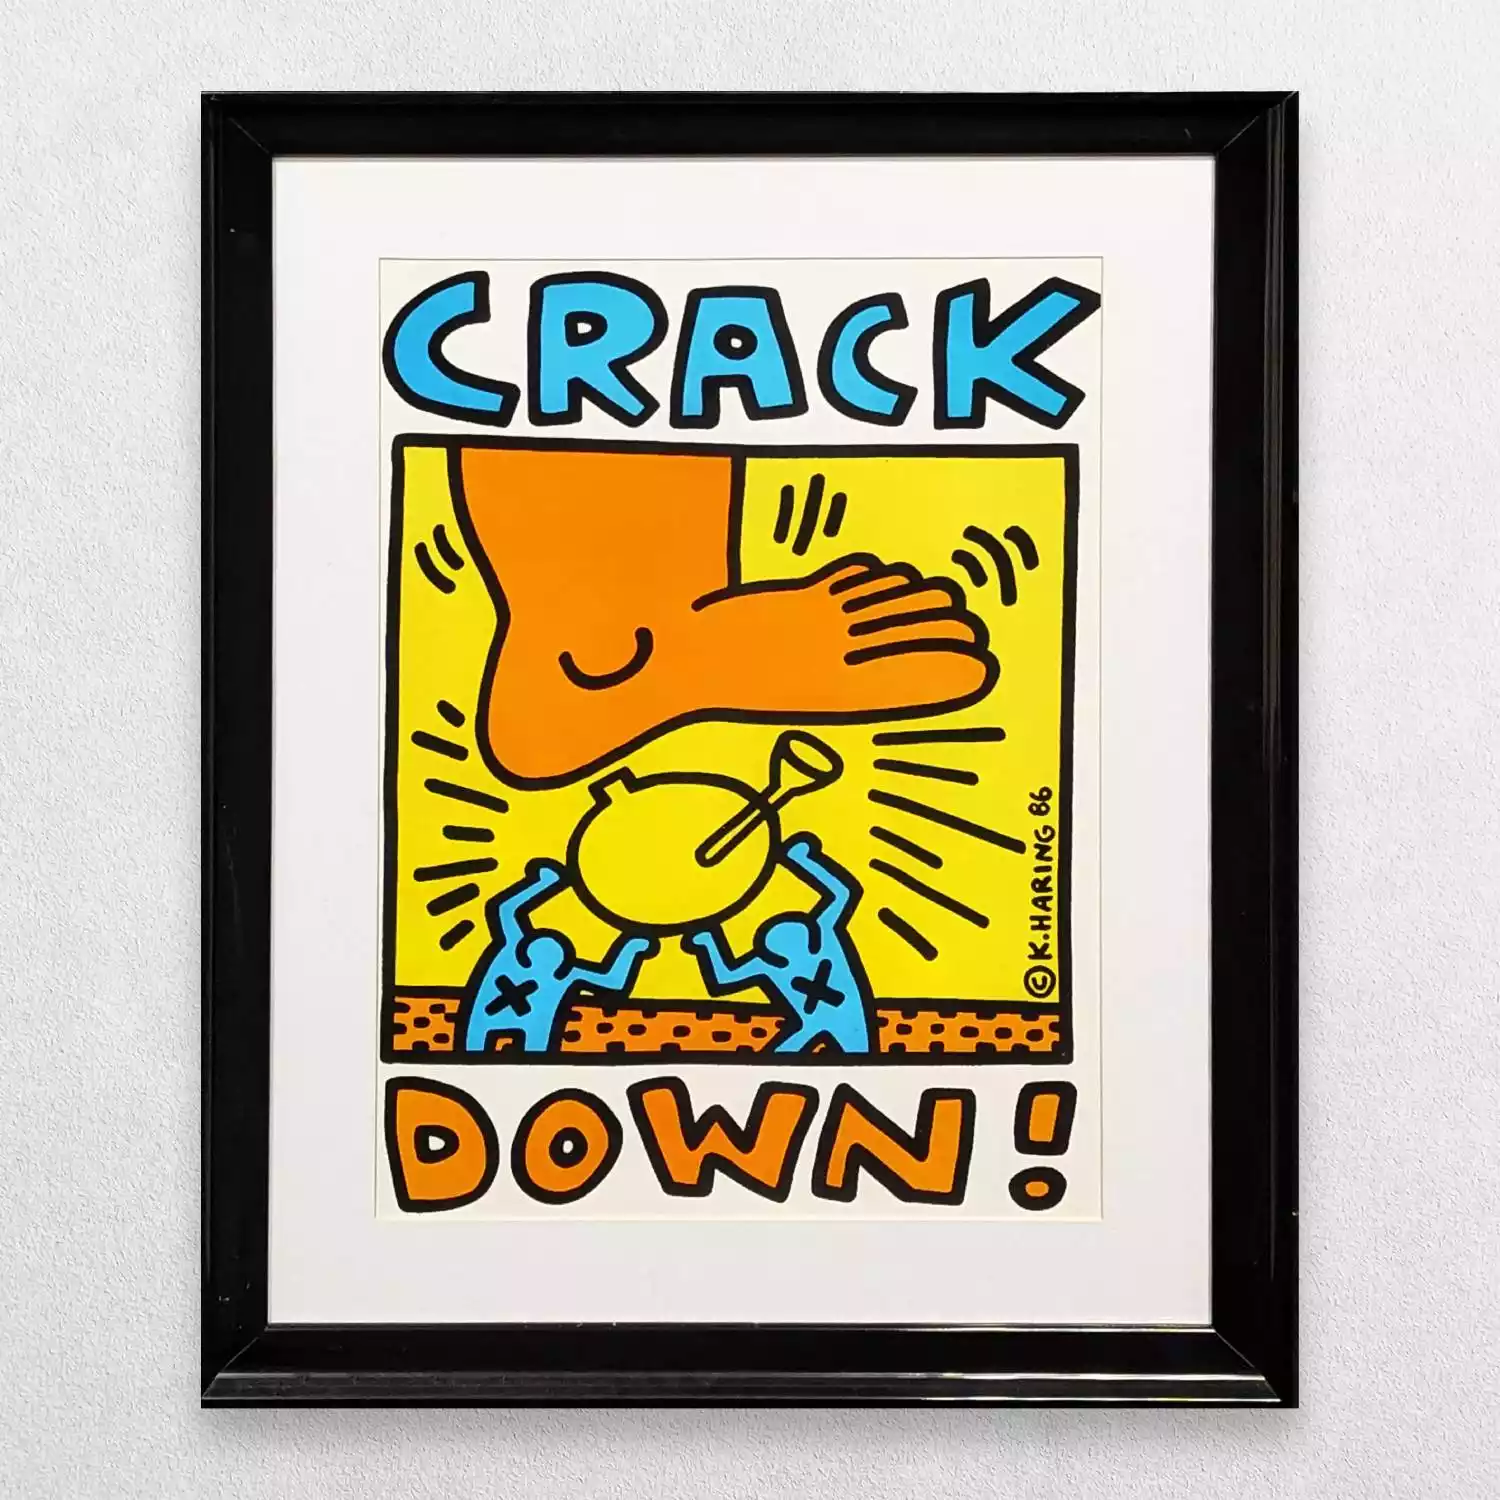 Keith Haring - Crack Down!